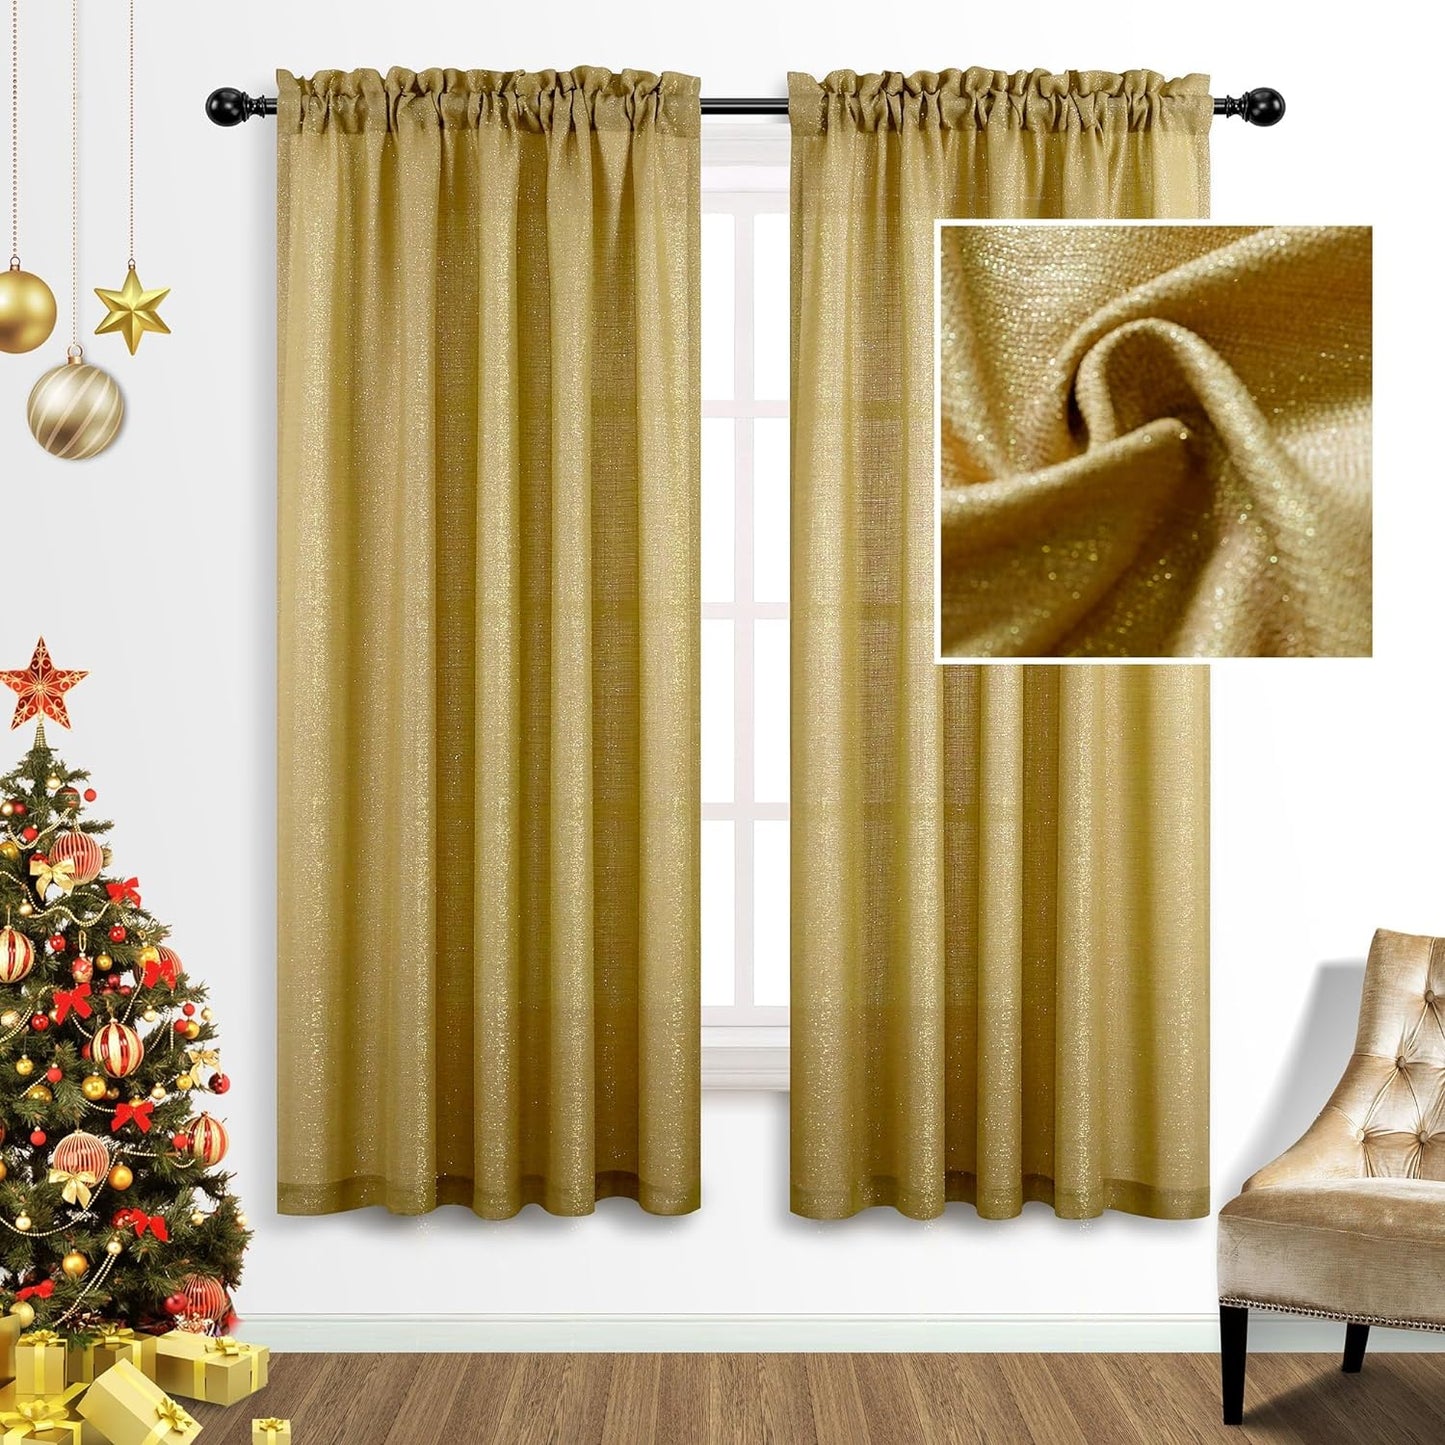 Gold Curtains 84 Inch Length for Living Room 2 Panels Set Rod Pocket Window Decor Semi Sheer Luxury Sparkle Shimmer Shiny Glitter Brown Golden Mustard Curtains for Bedroom 52X84 Long Christmas Decor  MRS.NATURALL TEXTILE Gold 52X63 